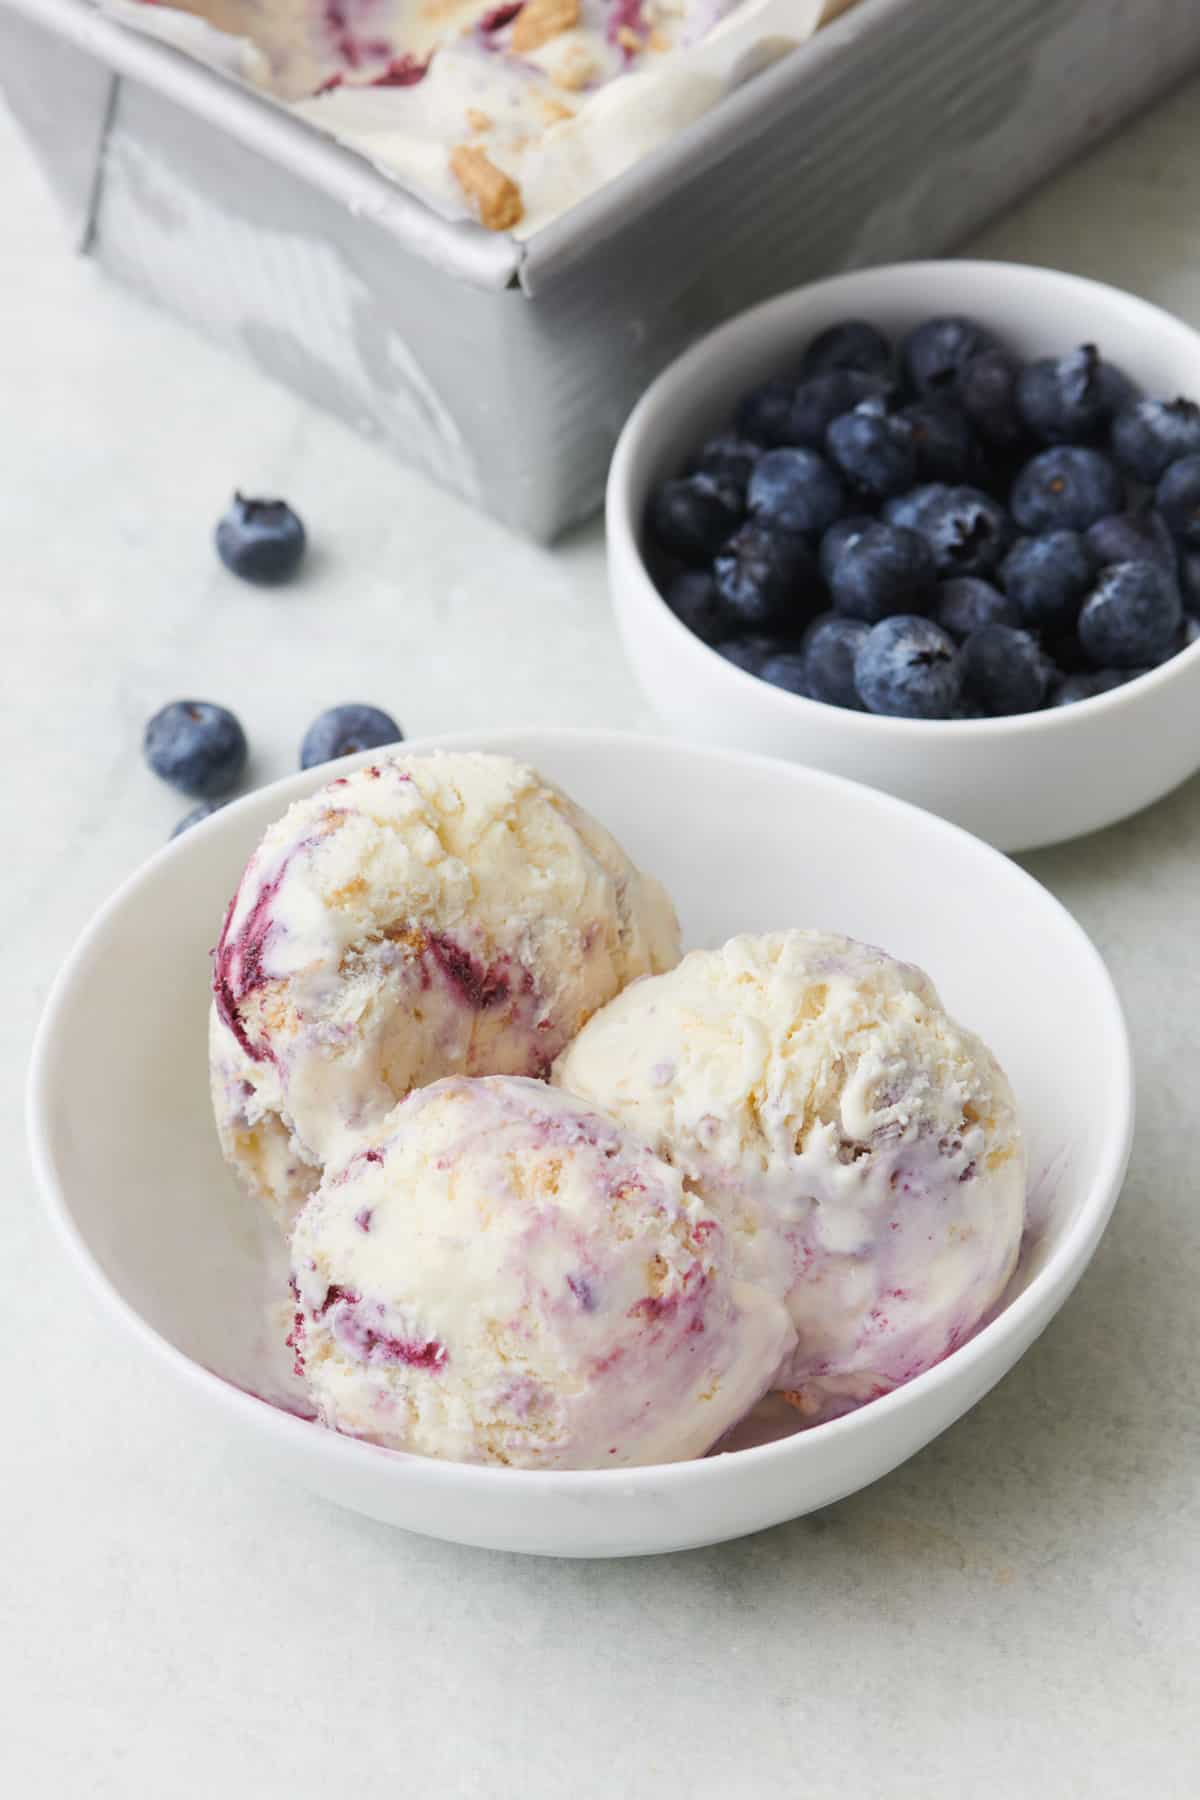 Blueberry ice cream in a bowl with fresh blueberries and the ice cream container nearby.